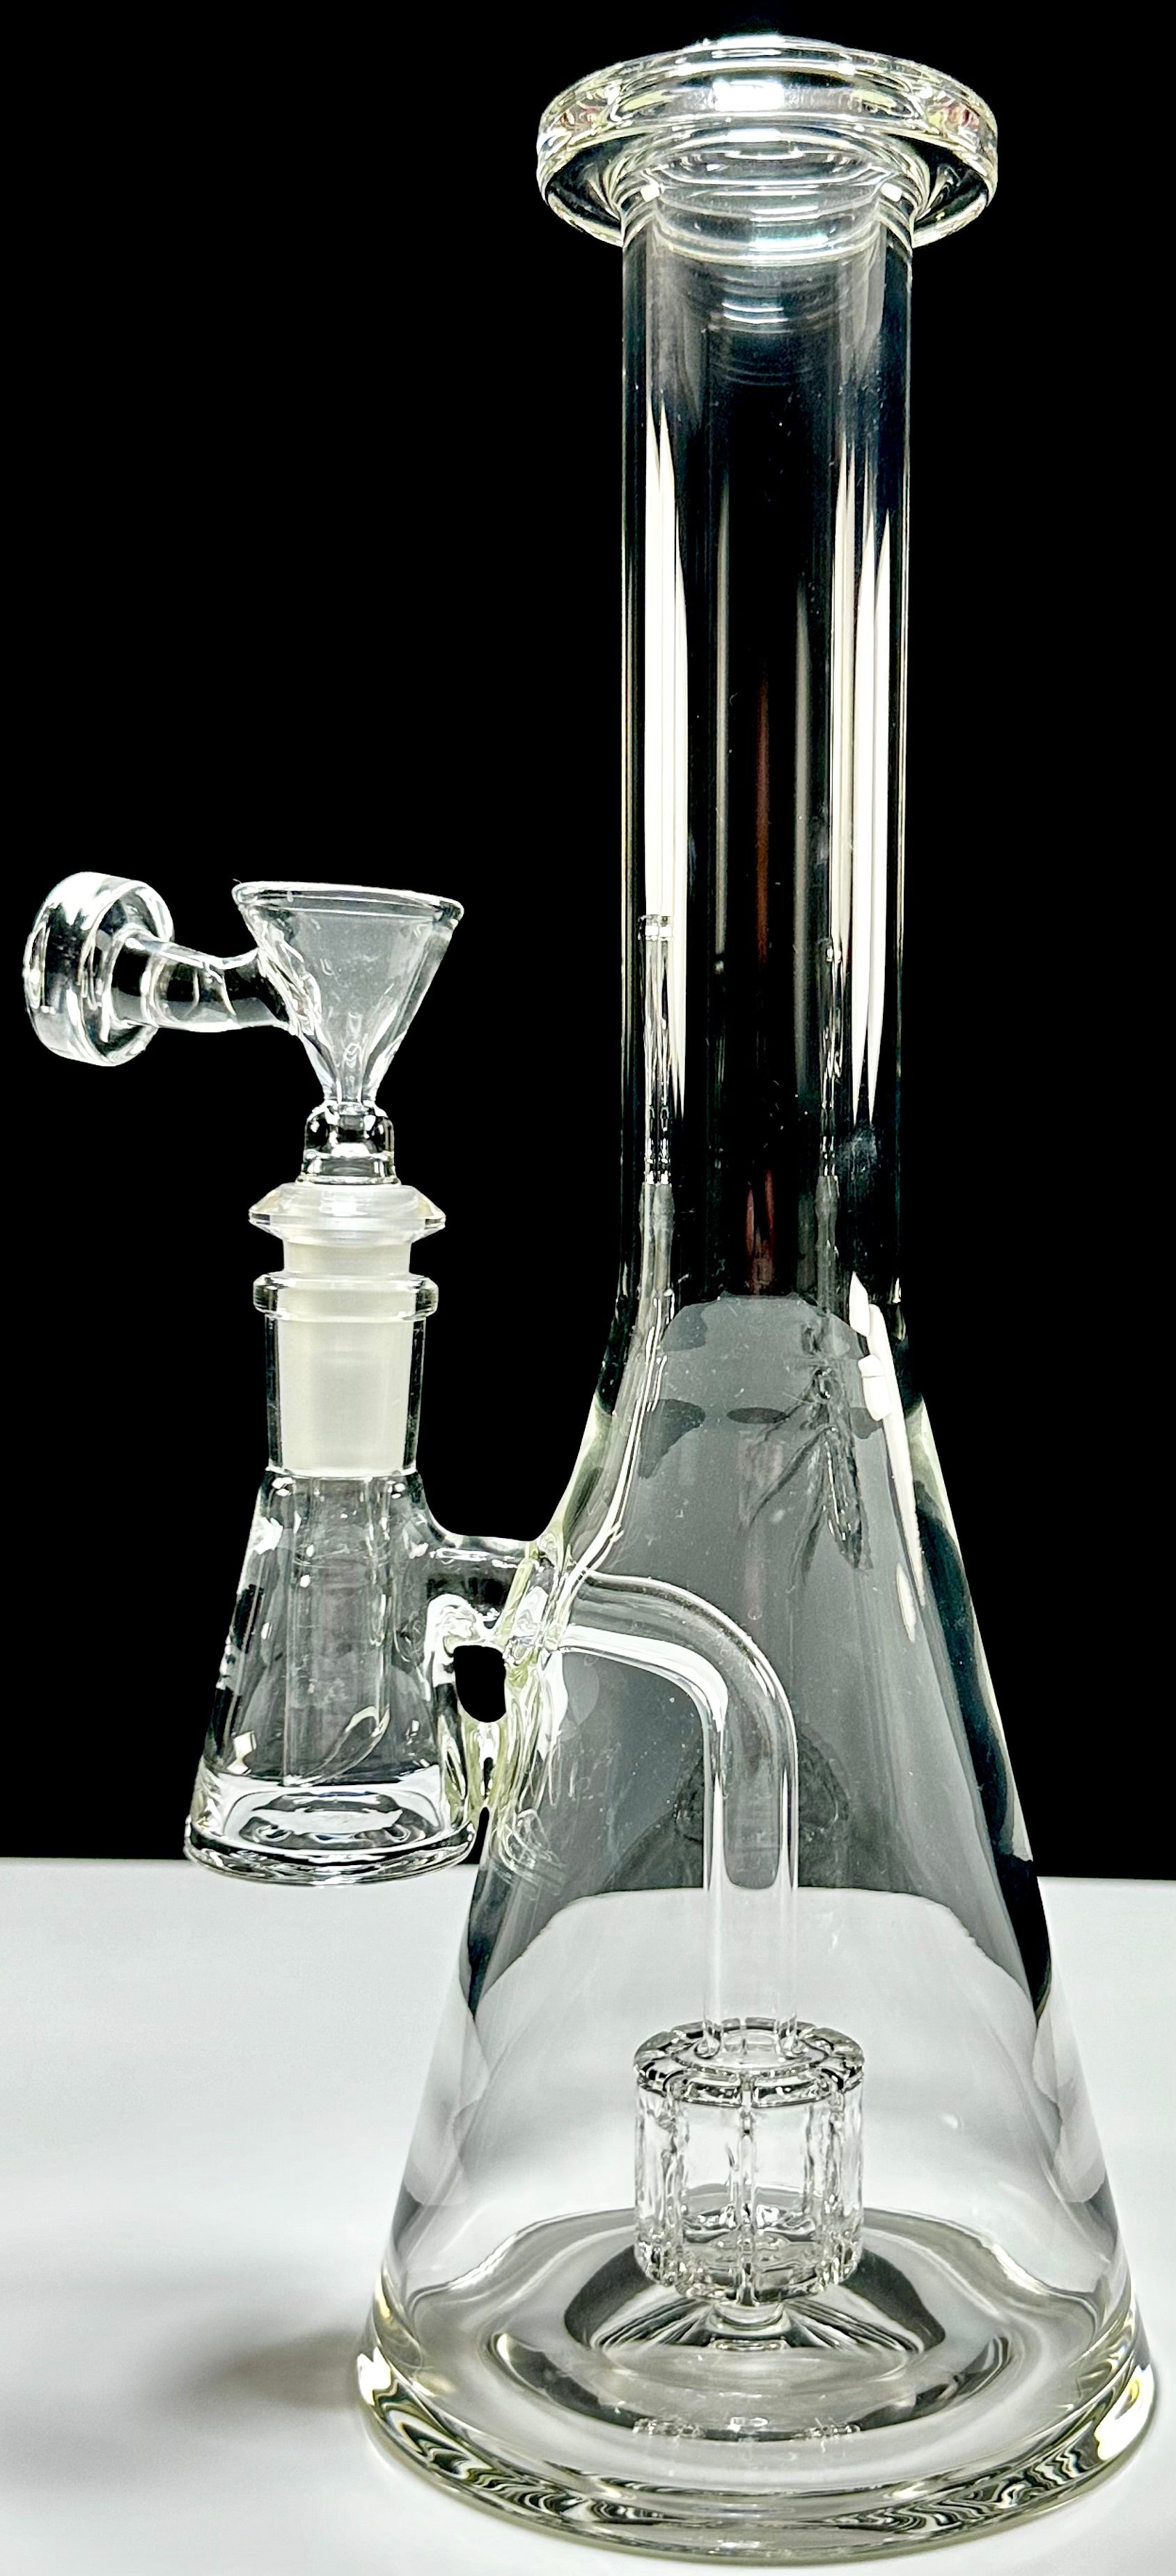 Williams Glass Excalibur 14mm w/ Built-In Dry Catcher